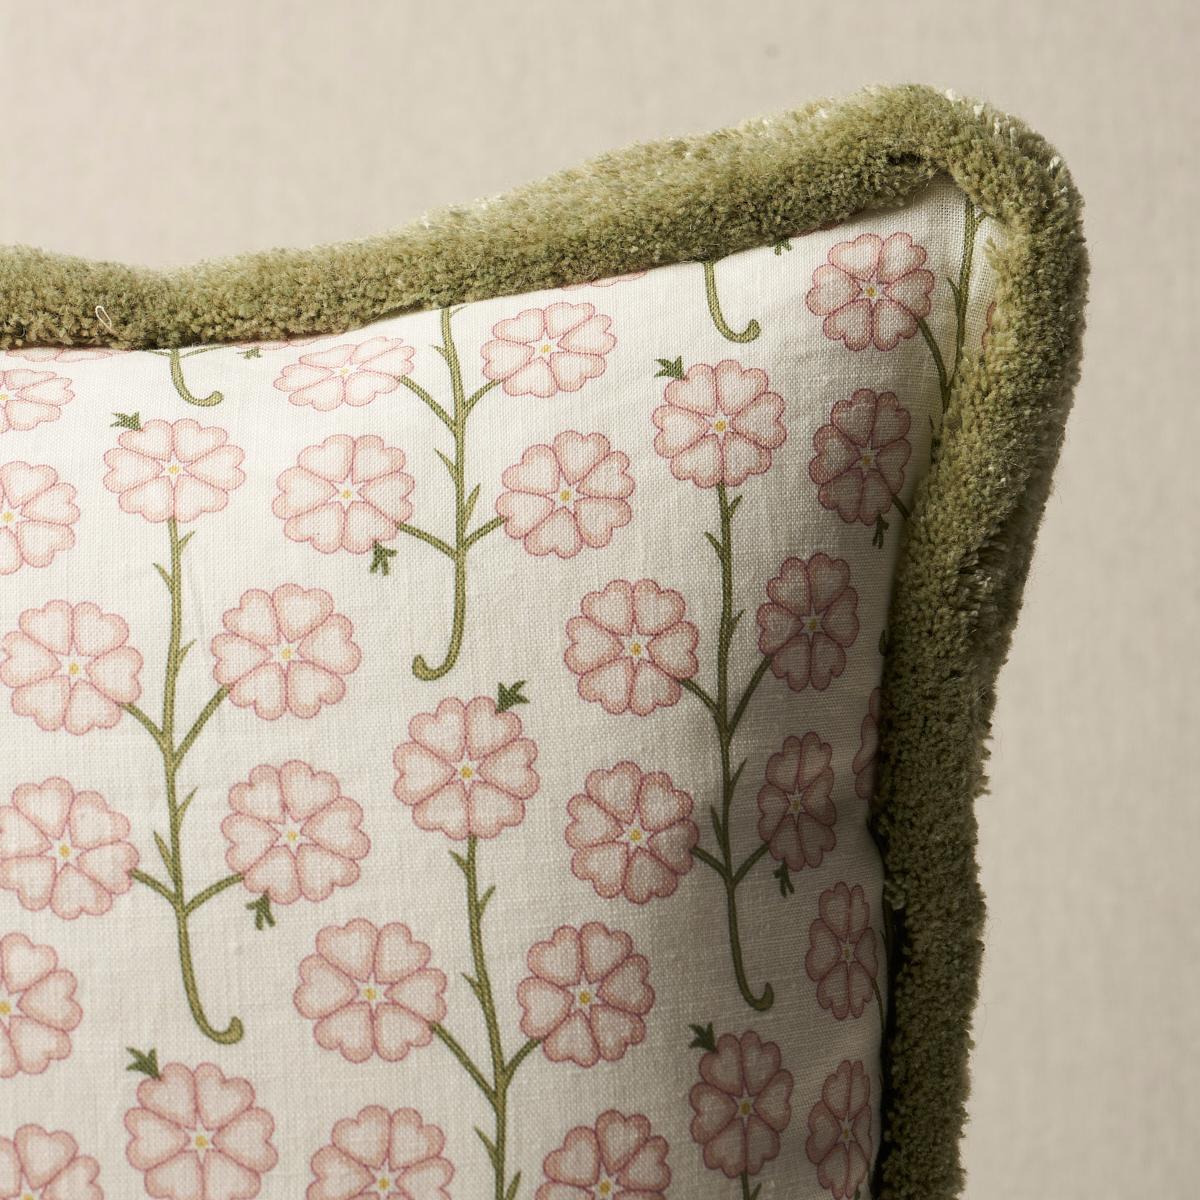 This pillow features Gardenia by Neisha Crosland. Inspired by 16th-century illustrations of the flora and fauna that explorer Ferdinand Magellan encountered in the New World, Neisha Crosland’s Gardenia is a small-scale stylized floral print on a